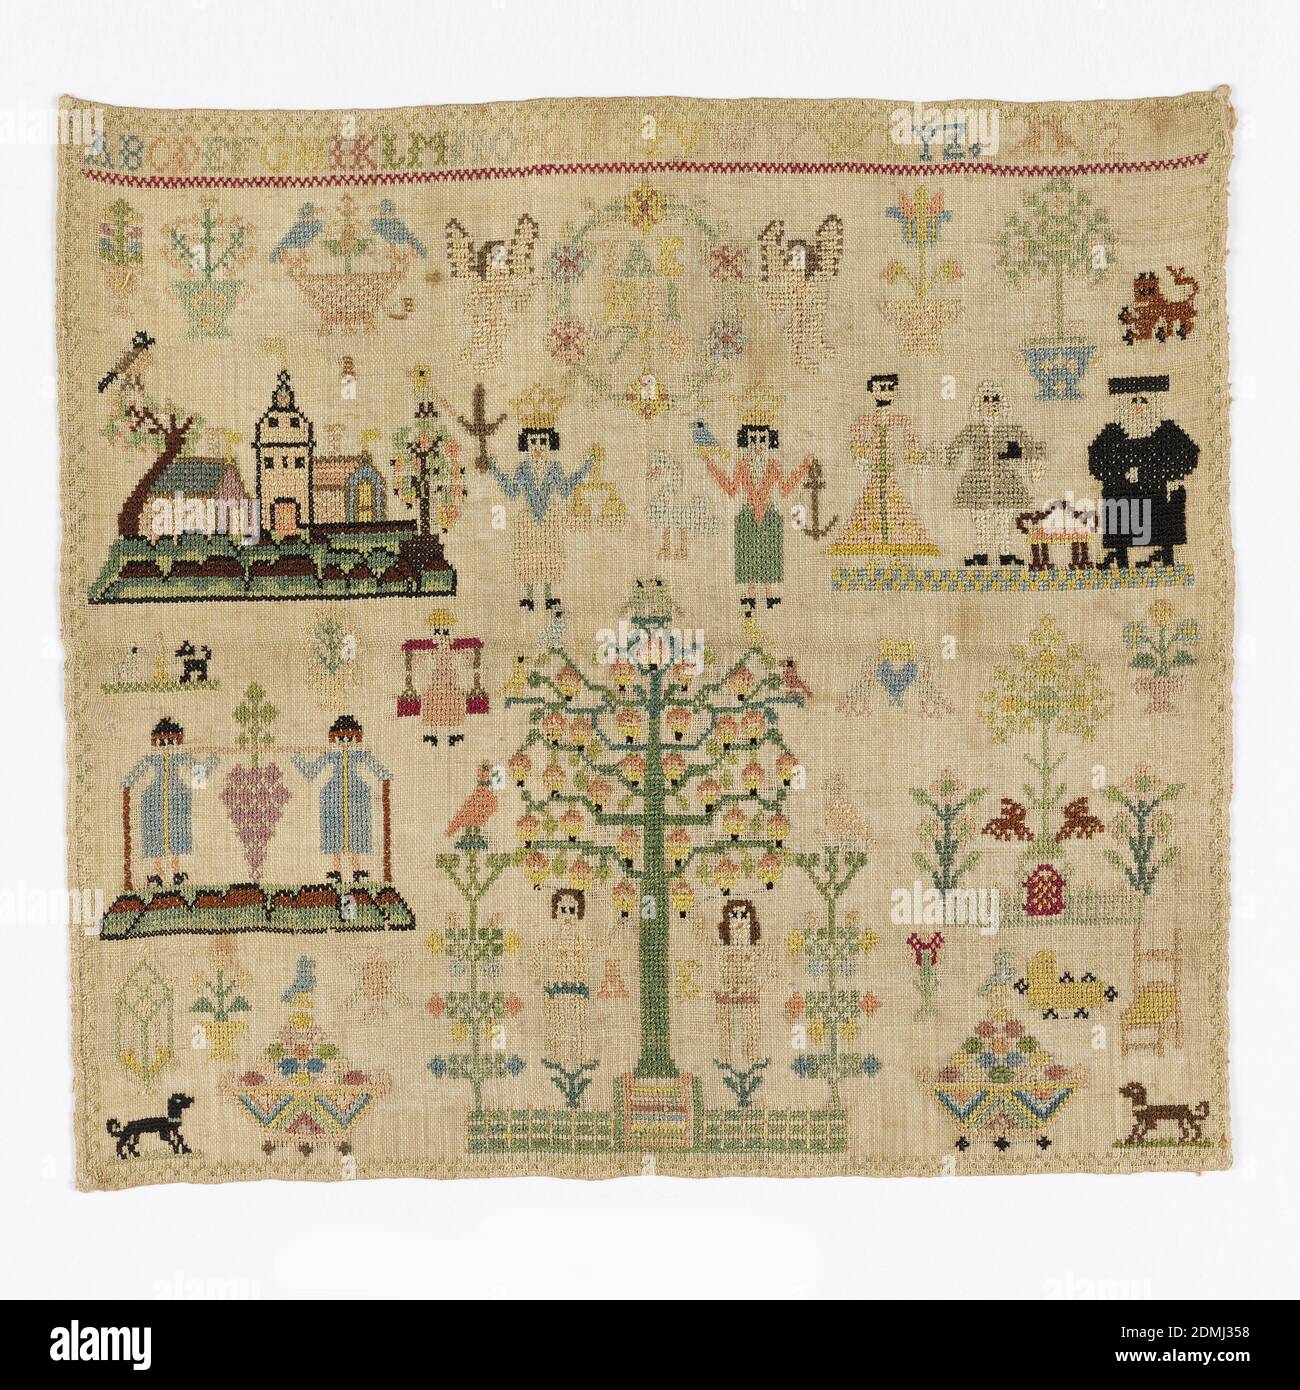 Sampler, Medium: silk embroidery on linen foundation Technique: embroidered on plain weave, Narrow border enclosing detached motifs showing wedding (?), castle, biblical scenes, figures representing Justice and Hope, birds, animals, plants., Hanover, Germany, 1745, embroidery & stitching, Sampler Stock Photo